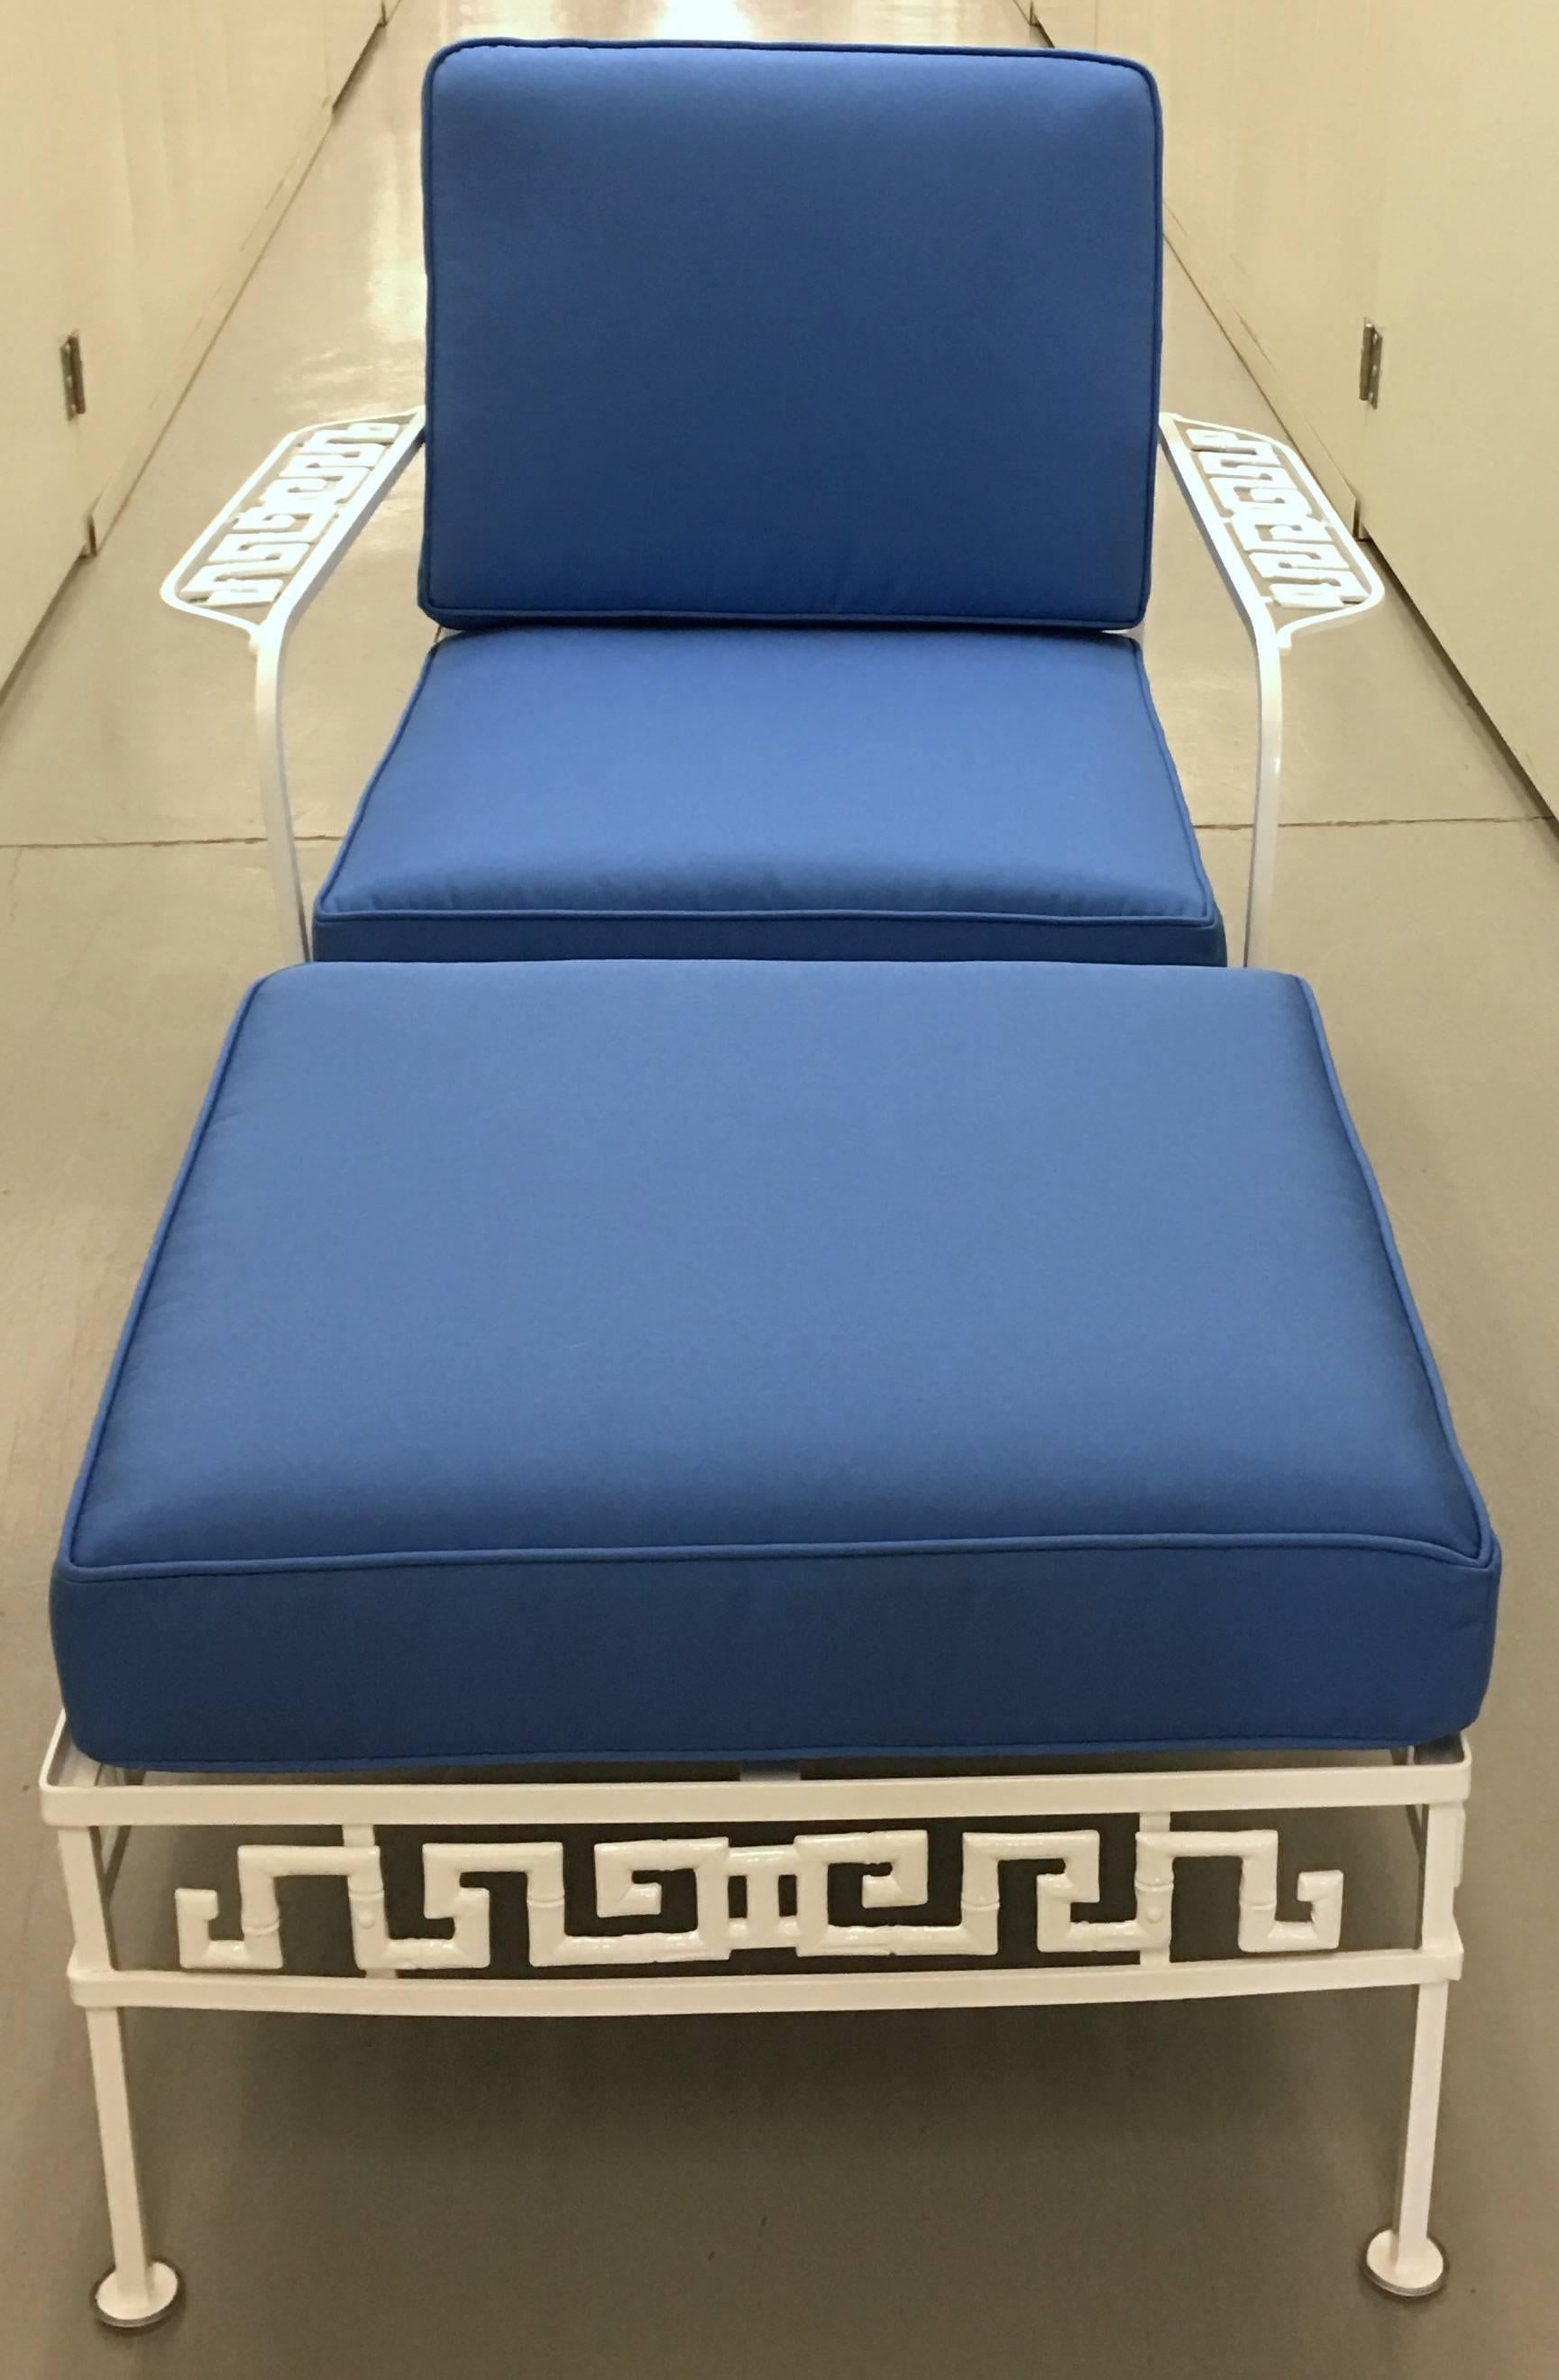 Midcentury Salterini Greek key chair and ottoman. Newly powder coated in gloss white finish. New ocean blue canvas cushions. Suitable for indoor or outdoor use.
Seat 15” H and 21” deep. Arm is 21” H. Ottoman 17” H x 23.5” W x 21.5” deep.